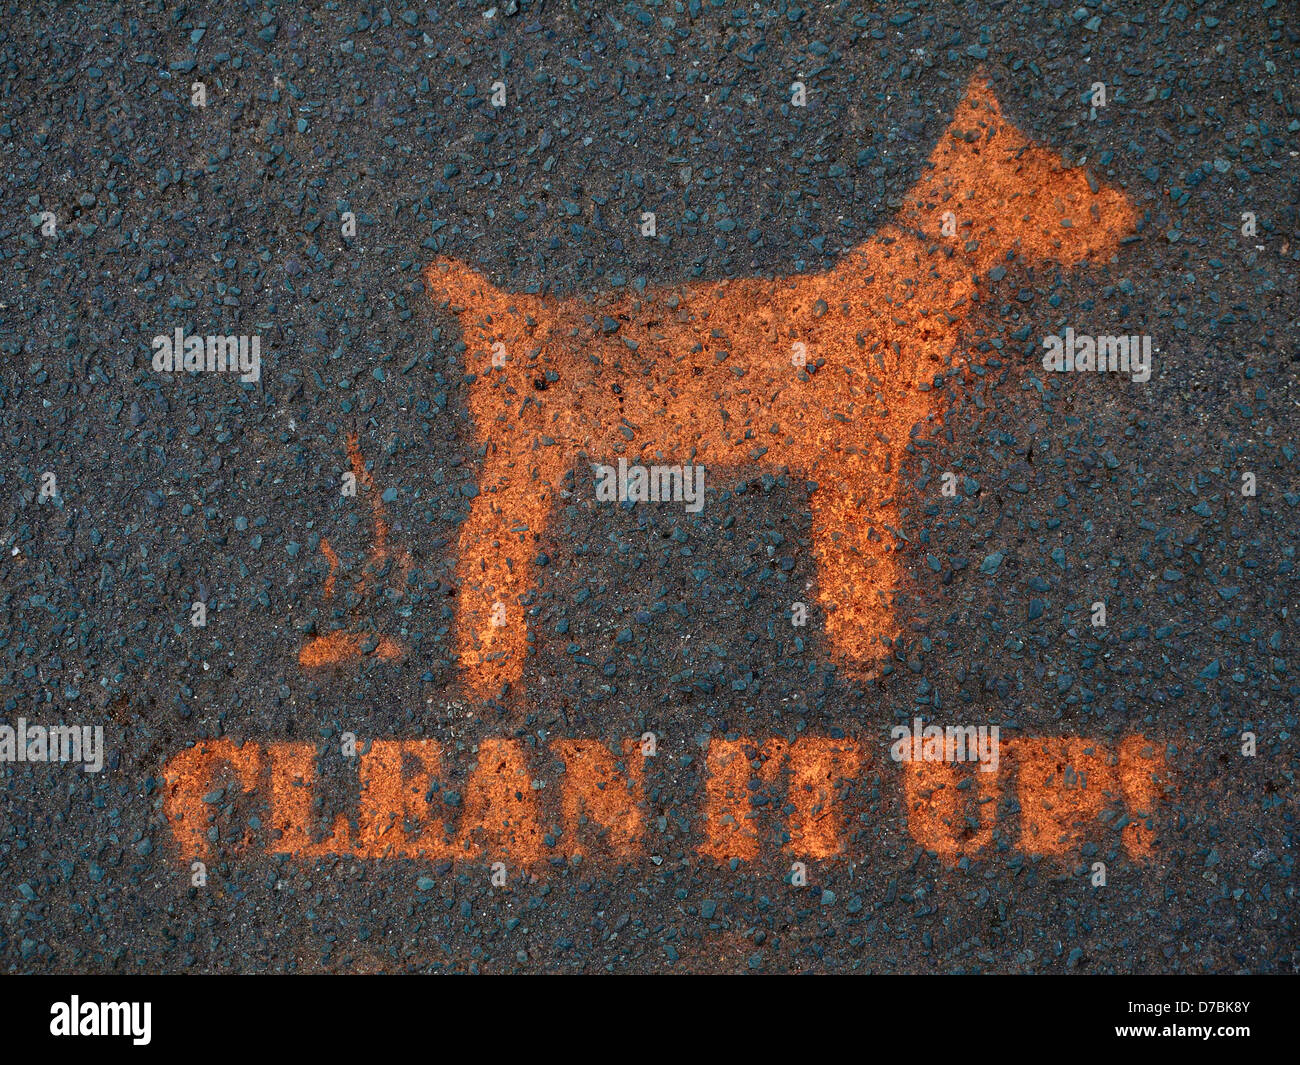 Stenciled "Clean it up!" sign on pavement Stock Photo